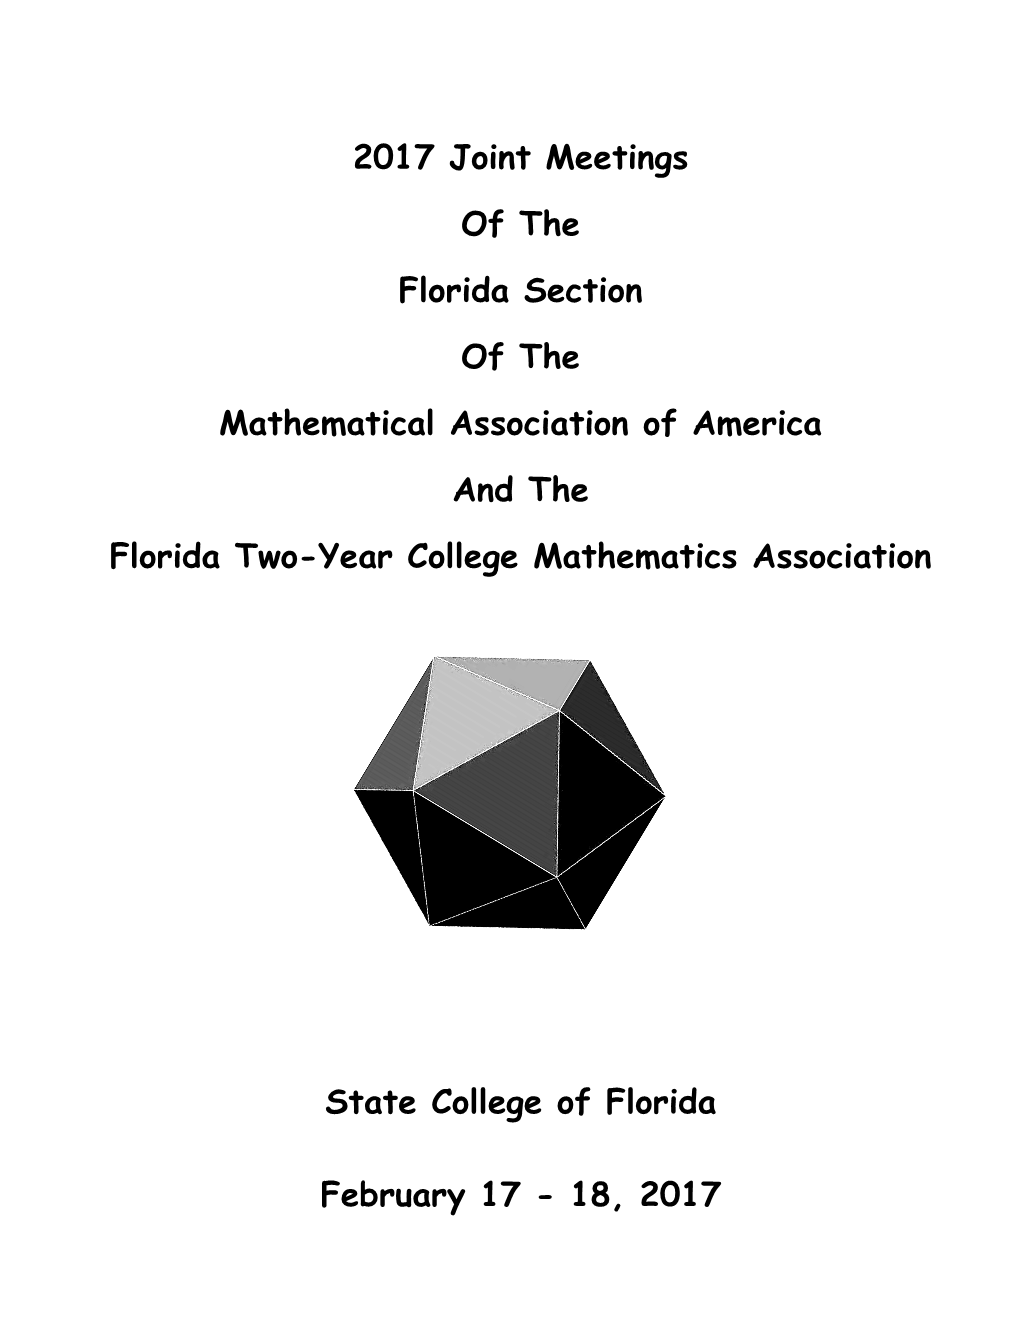 2017 Joint Meetings of the Florida Section of the Mathematical Association of America and the Florida Two-Year College Mathematics Association